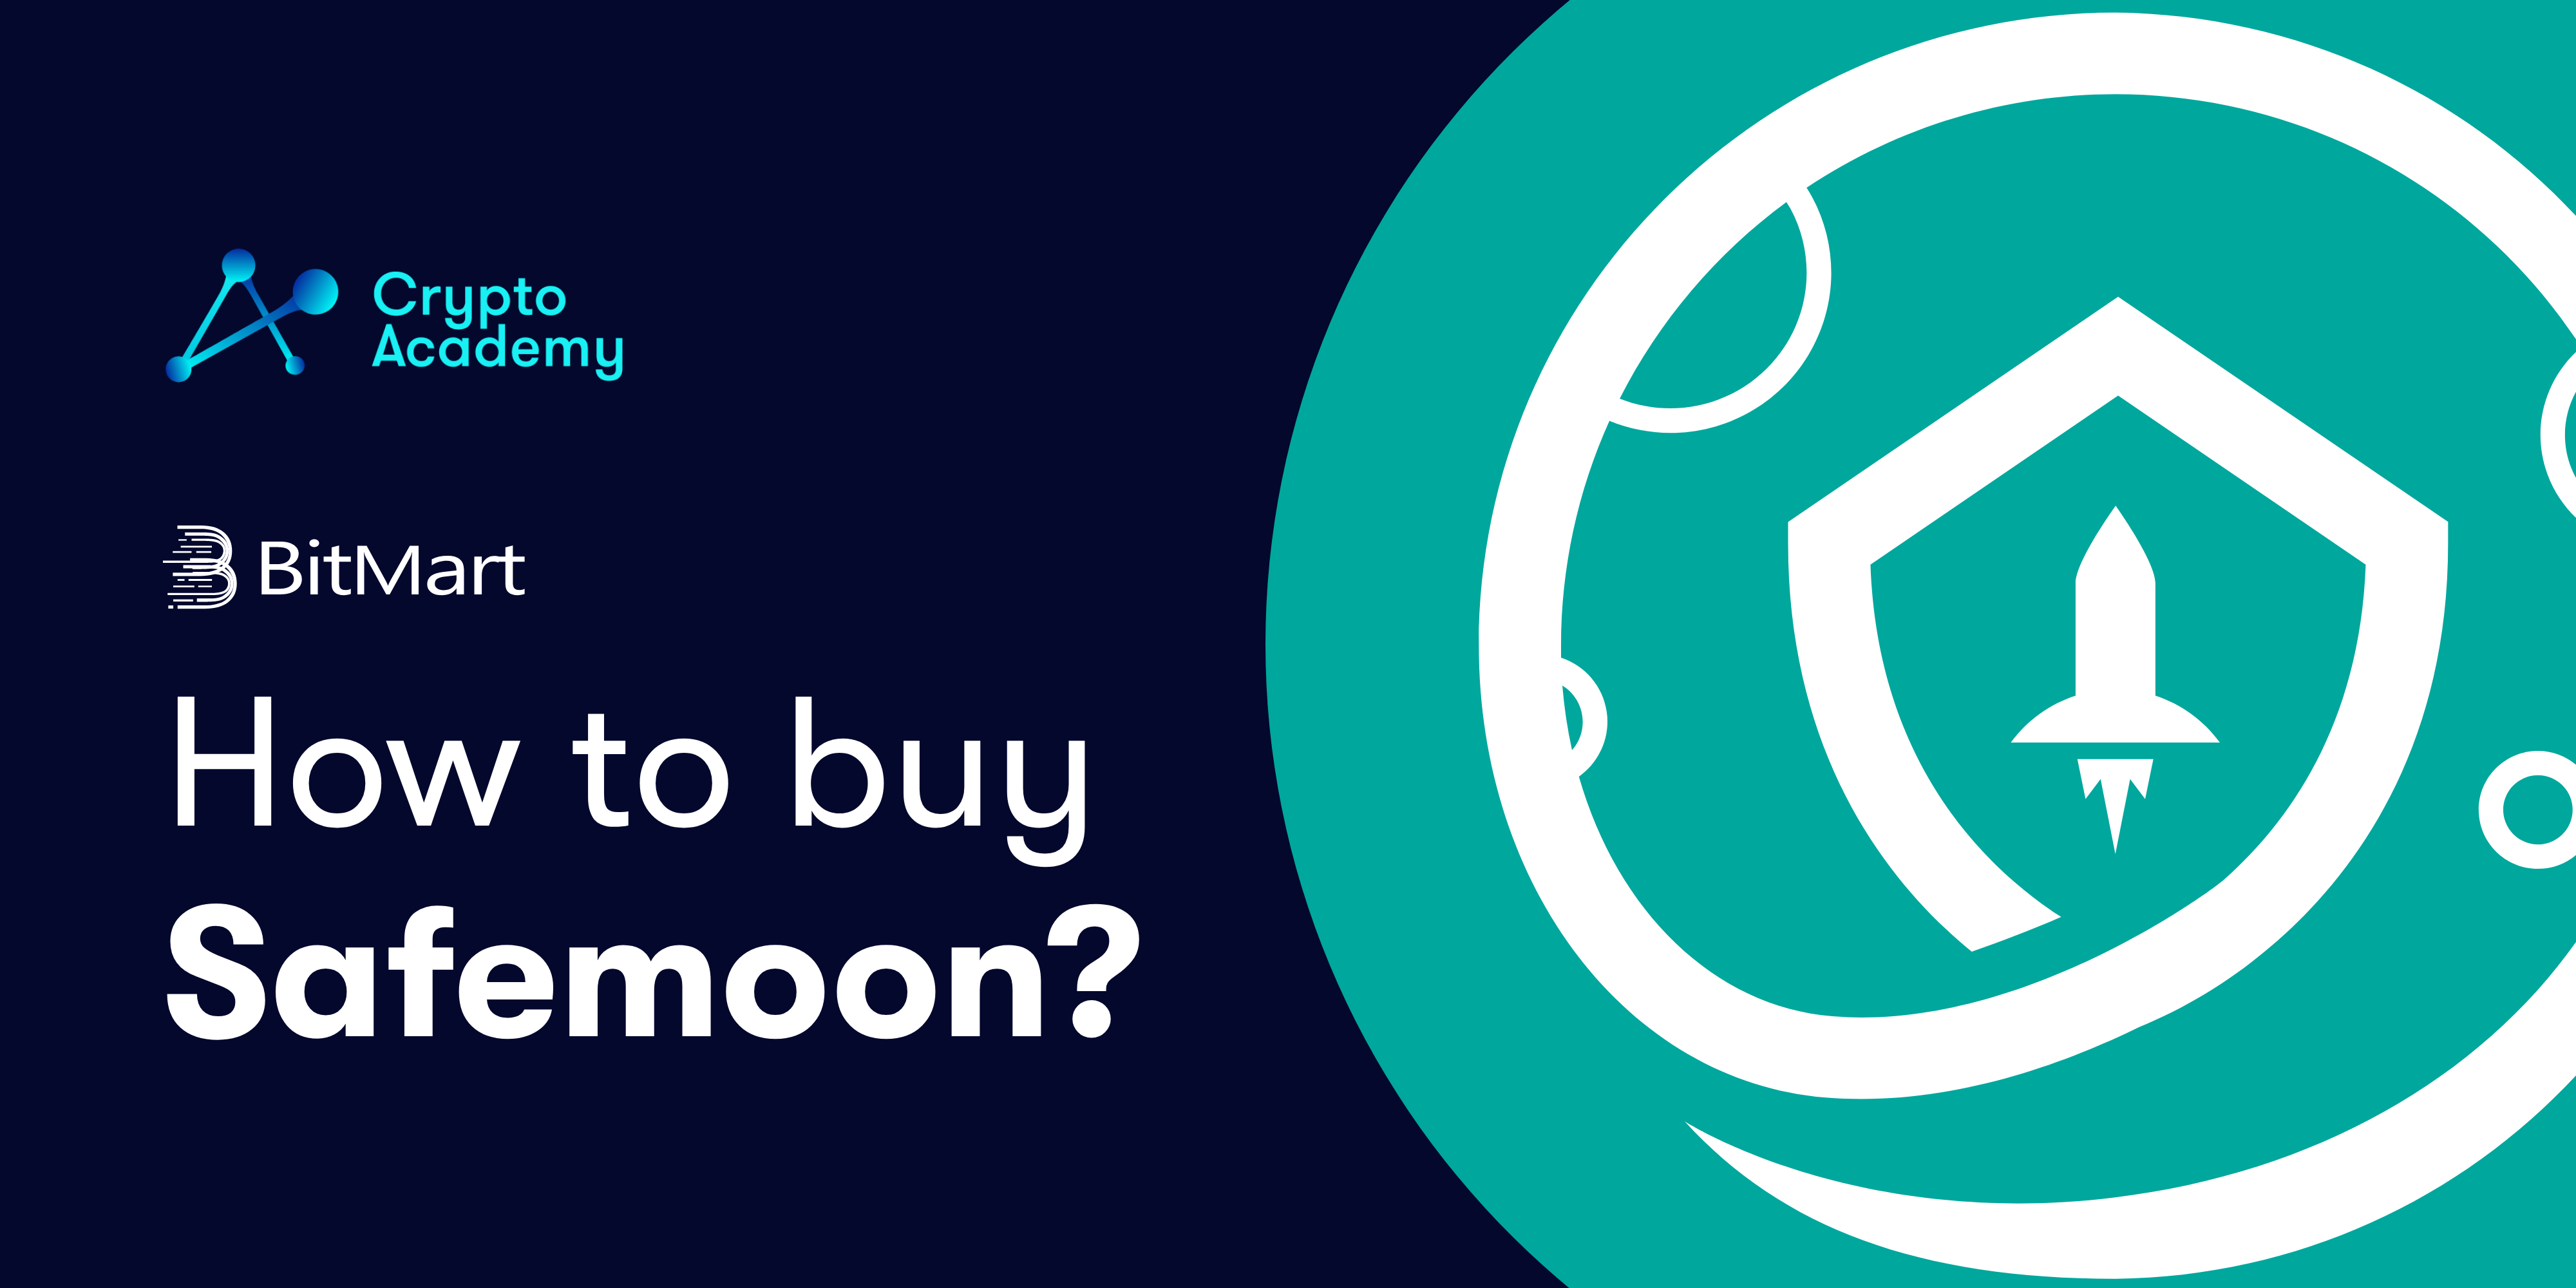 Safemoon_How-to-buy-Safemoon-4.png